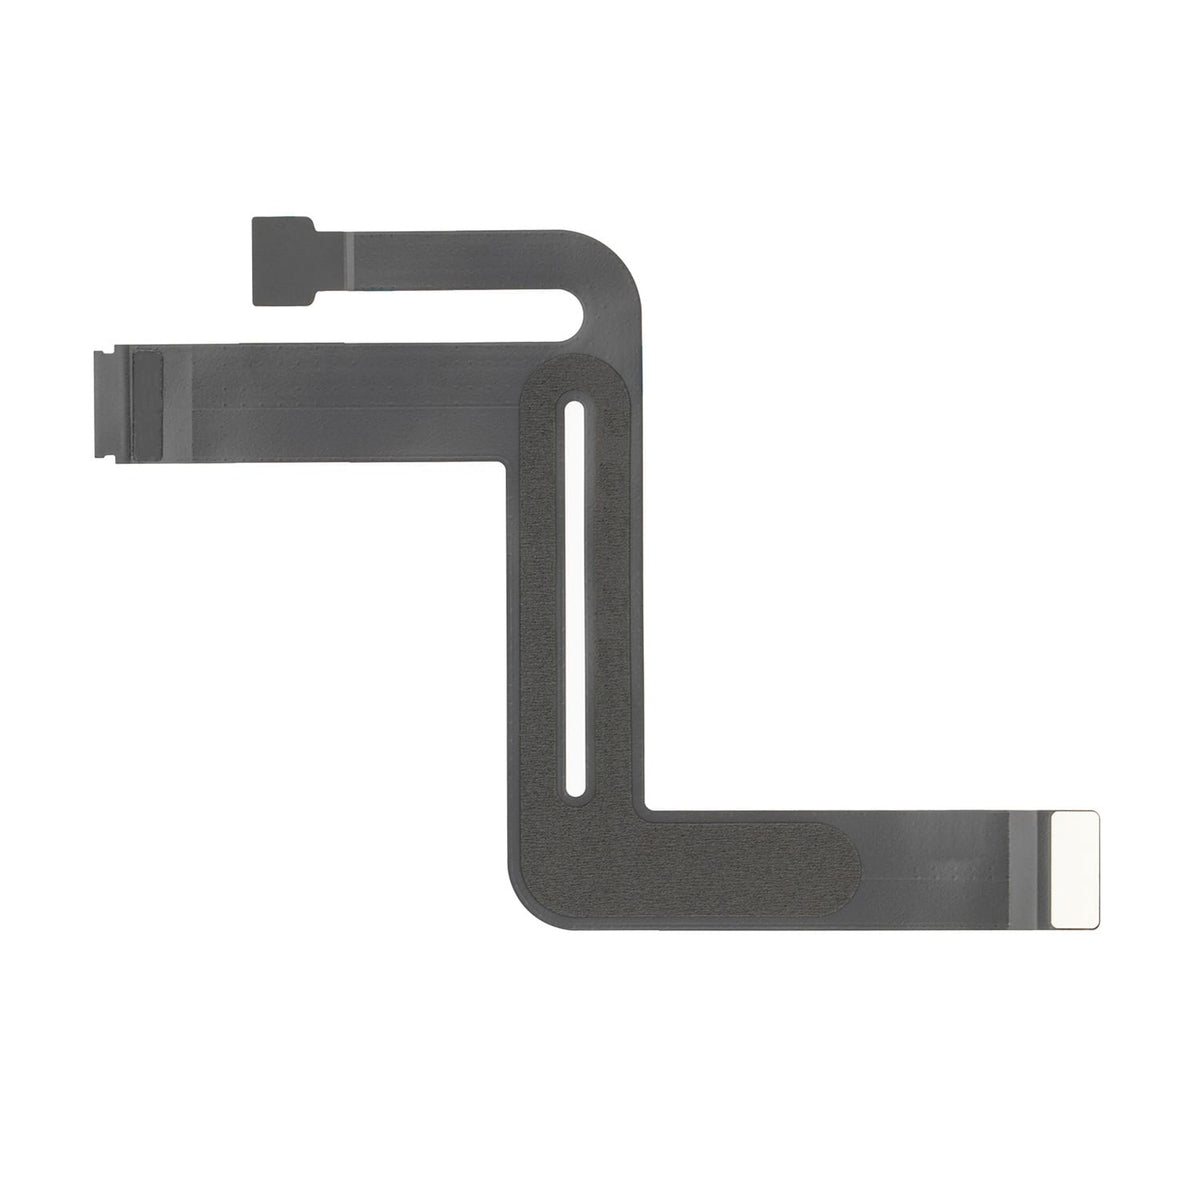 TRACKPAD FLEX CABLE FOR MACBOOK AIR 13" M1 A2337 (LATE 2020)